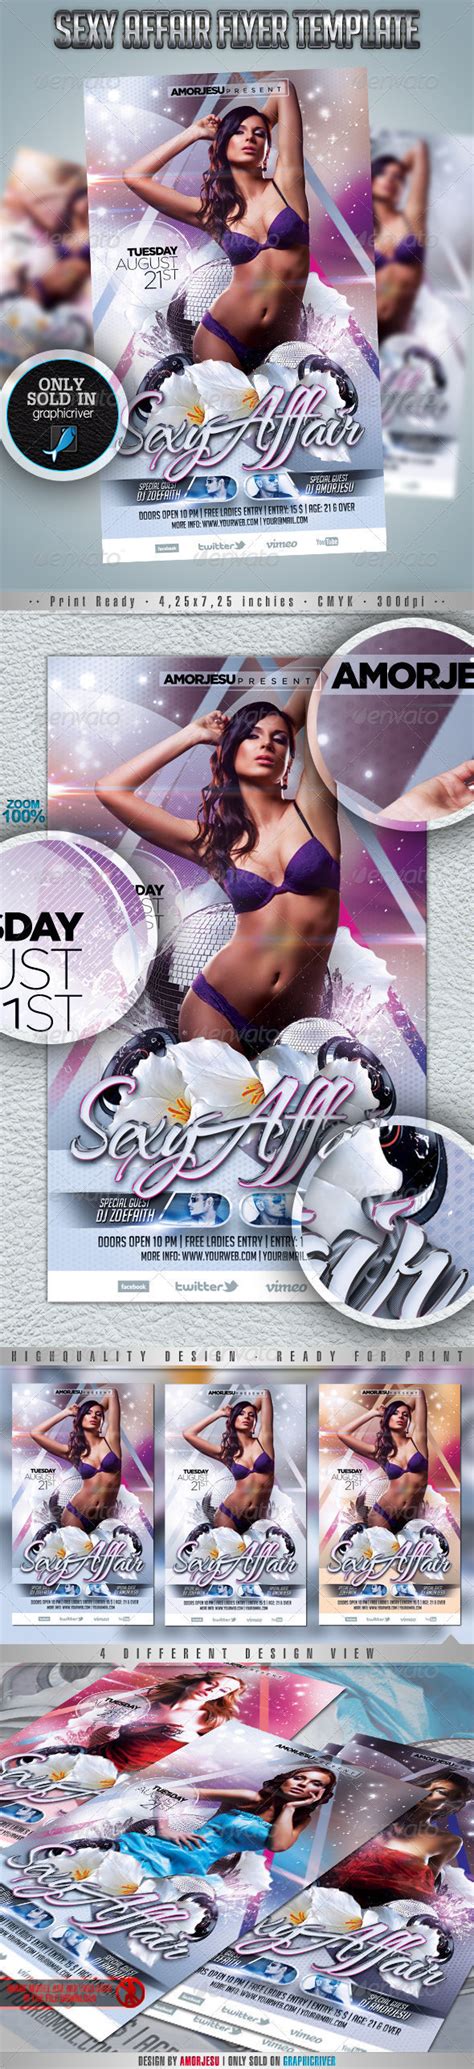 sexy affair flyer template by amorjesu graphicriver